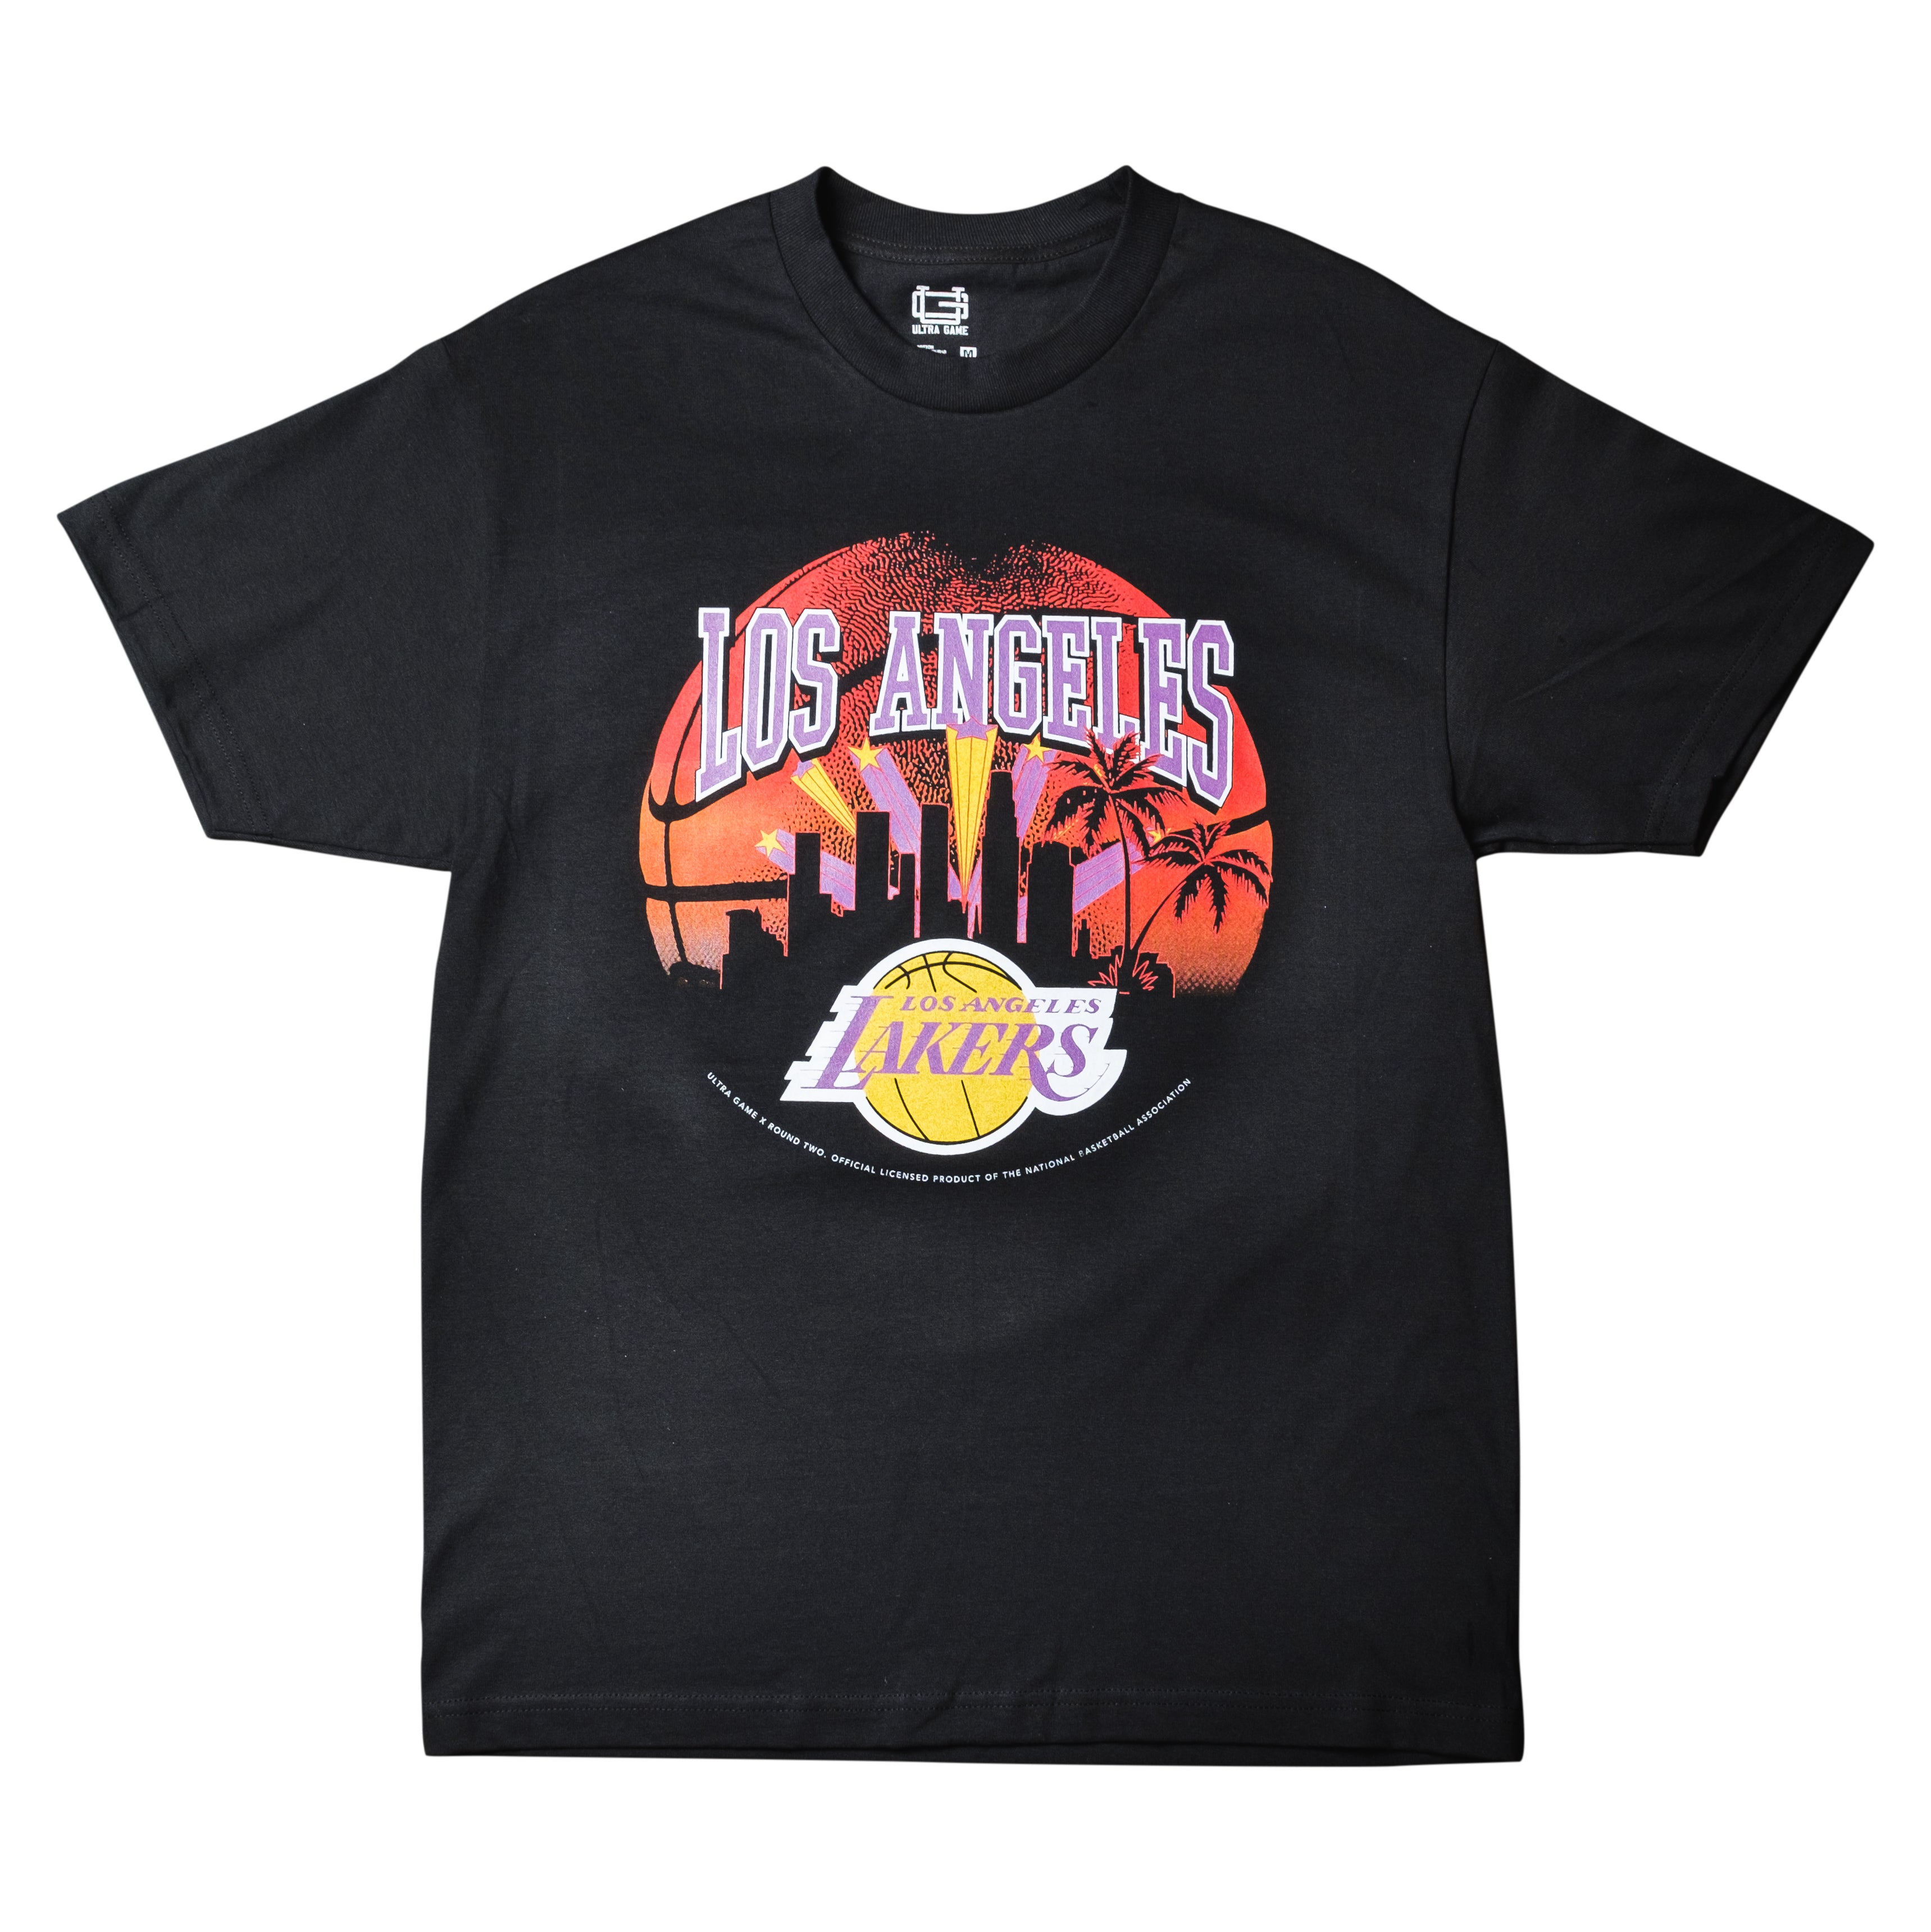 LA Lakers x Round Two Tee in Black